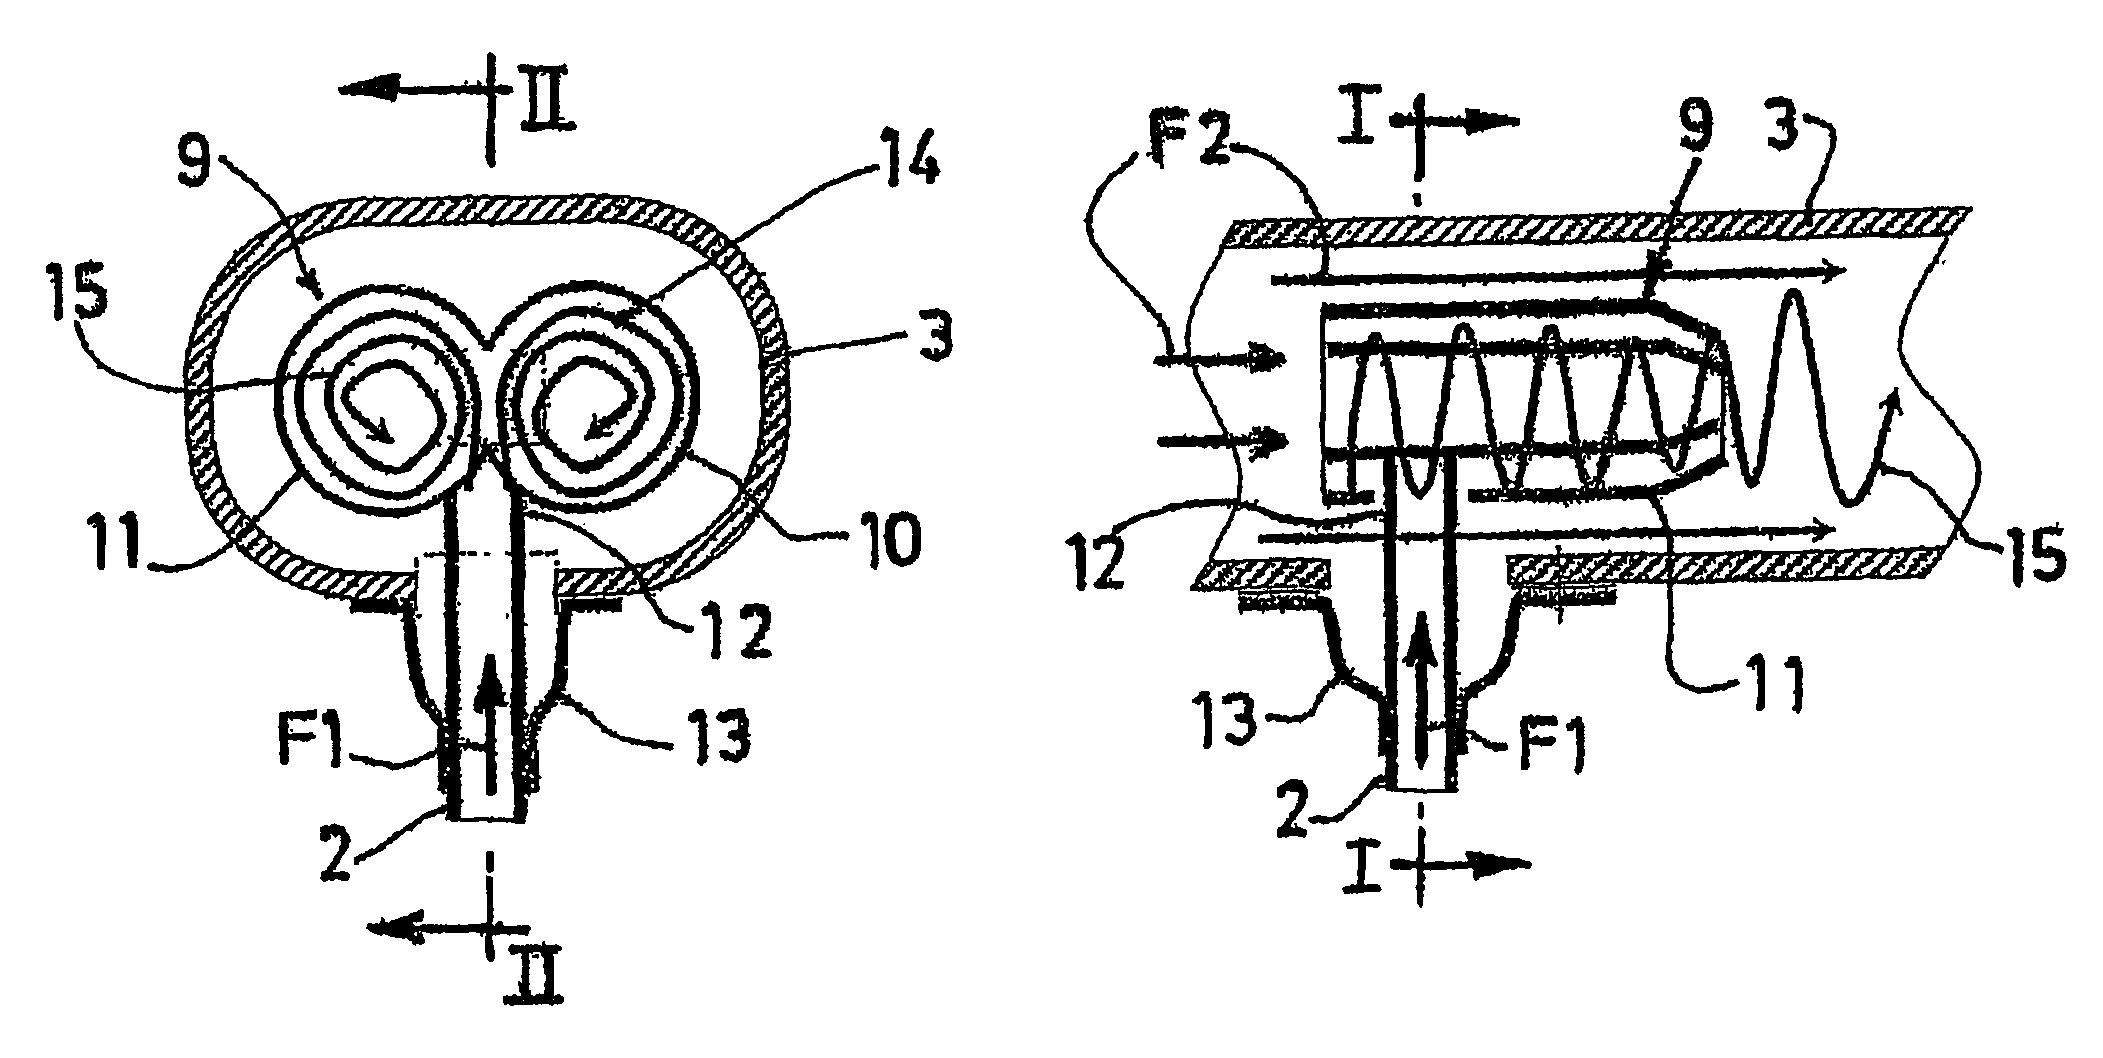 Exhaust gas recirculation device for an internal combustion engine